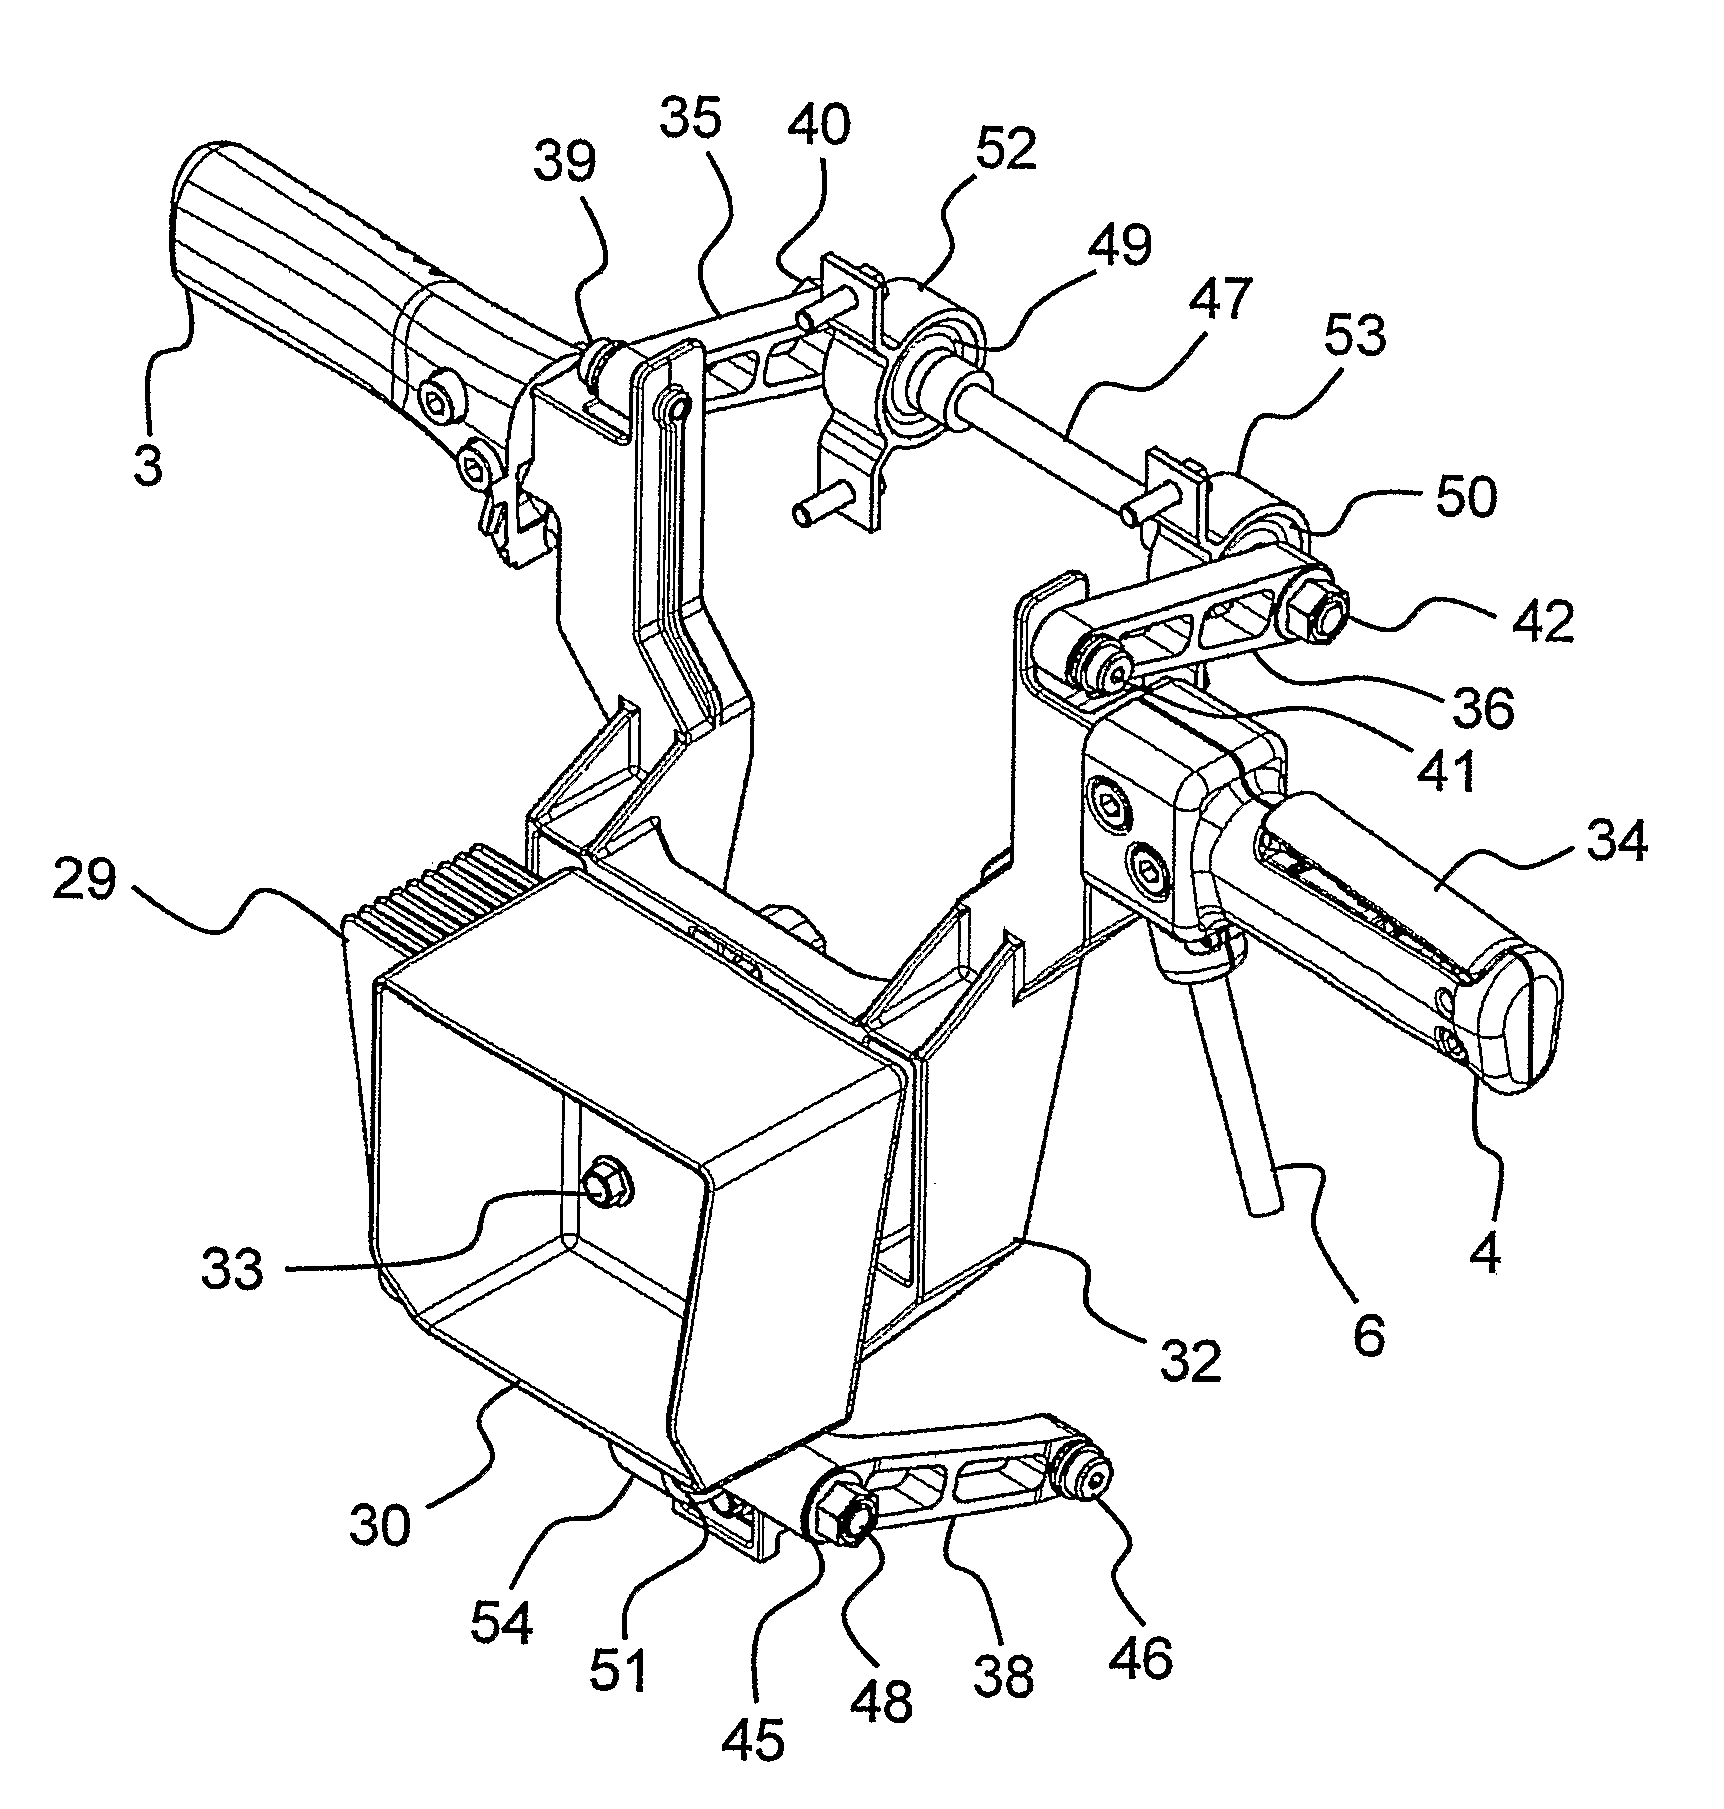 Breaker tool with vibration damped handle device